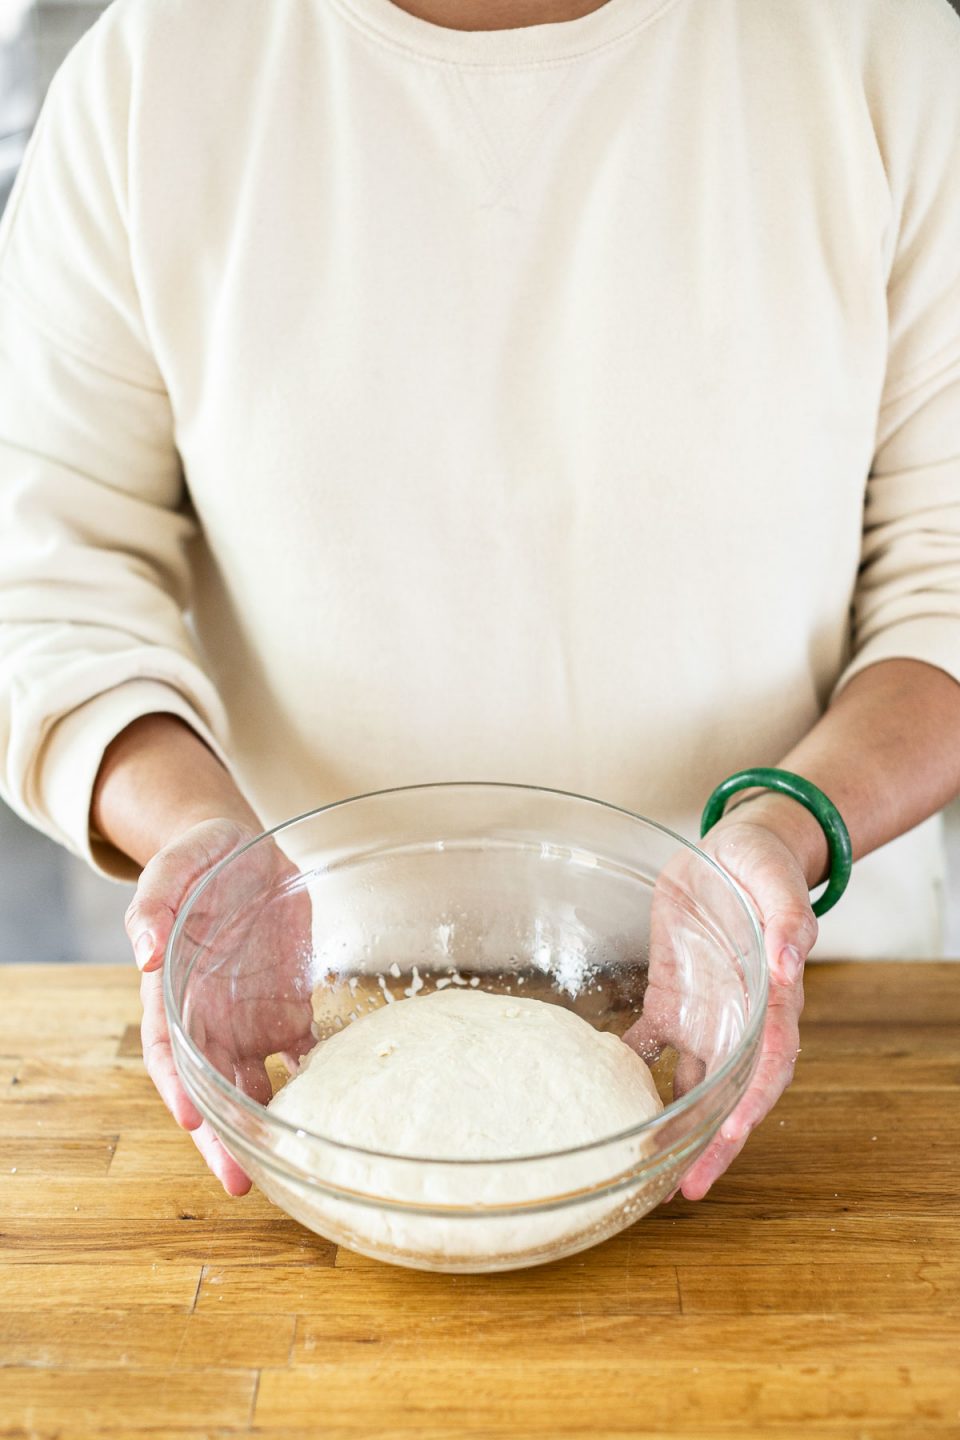 Mixing DeLallo Pizza Dough Kit: Jess, shown in a white sweatshirt, stands behind a butcher block counter holding a large glass mixing bowl with the kneaded dough inside.